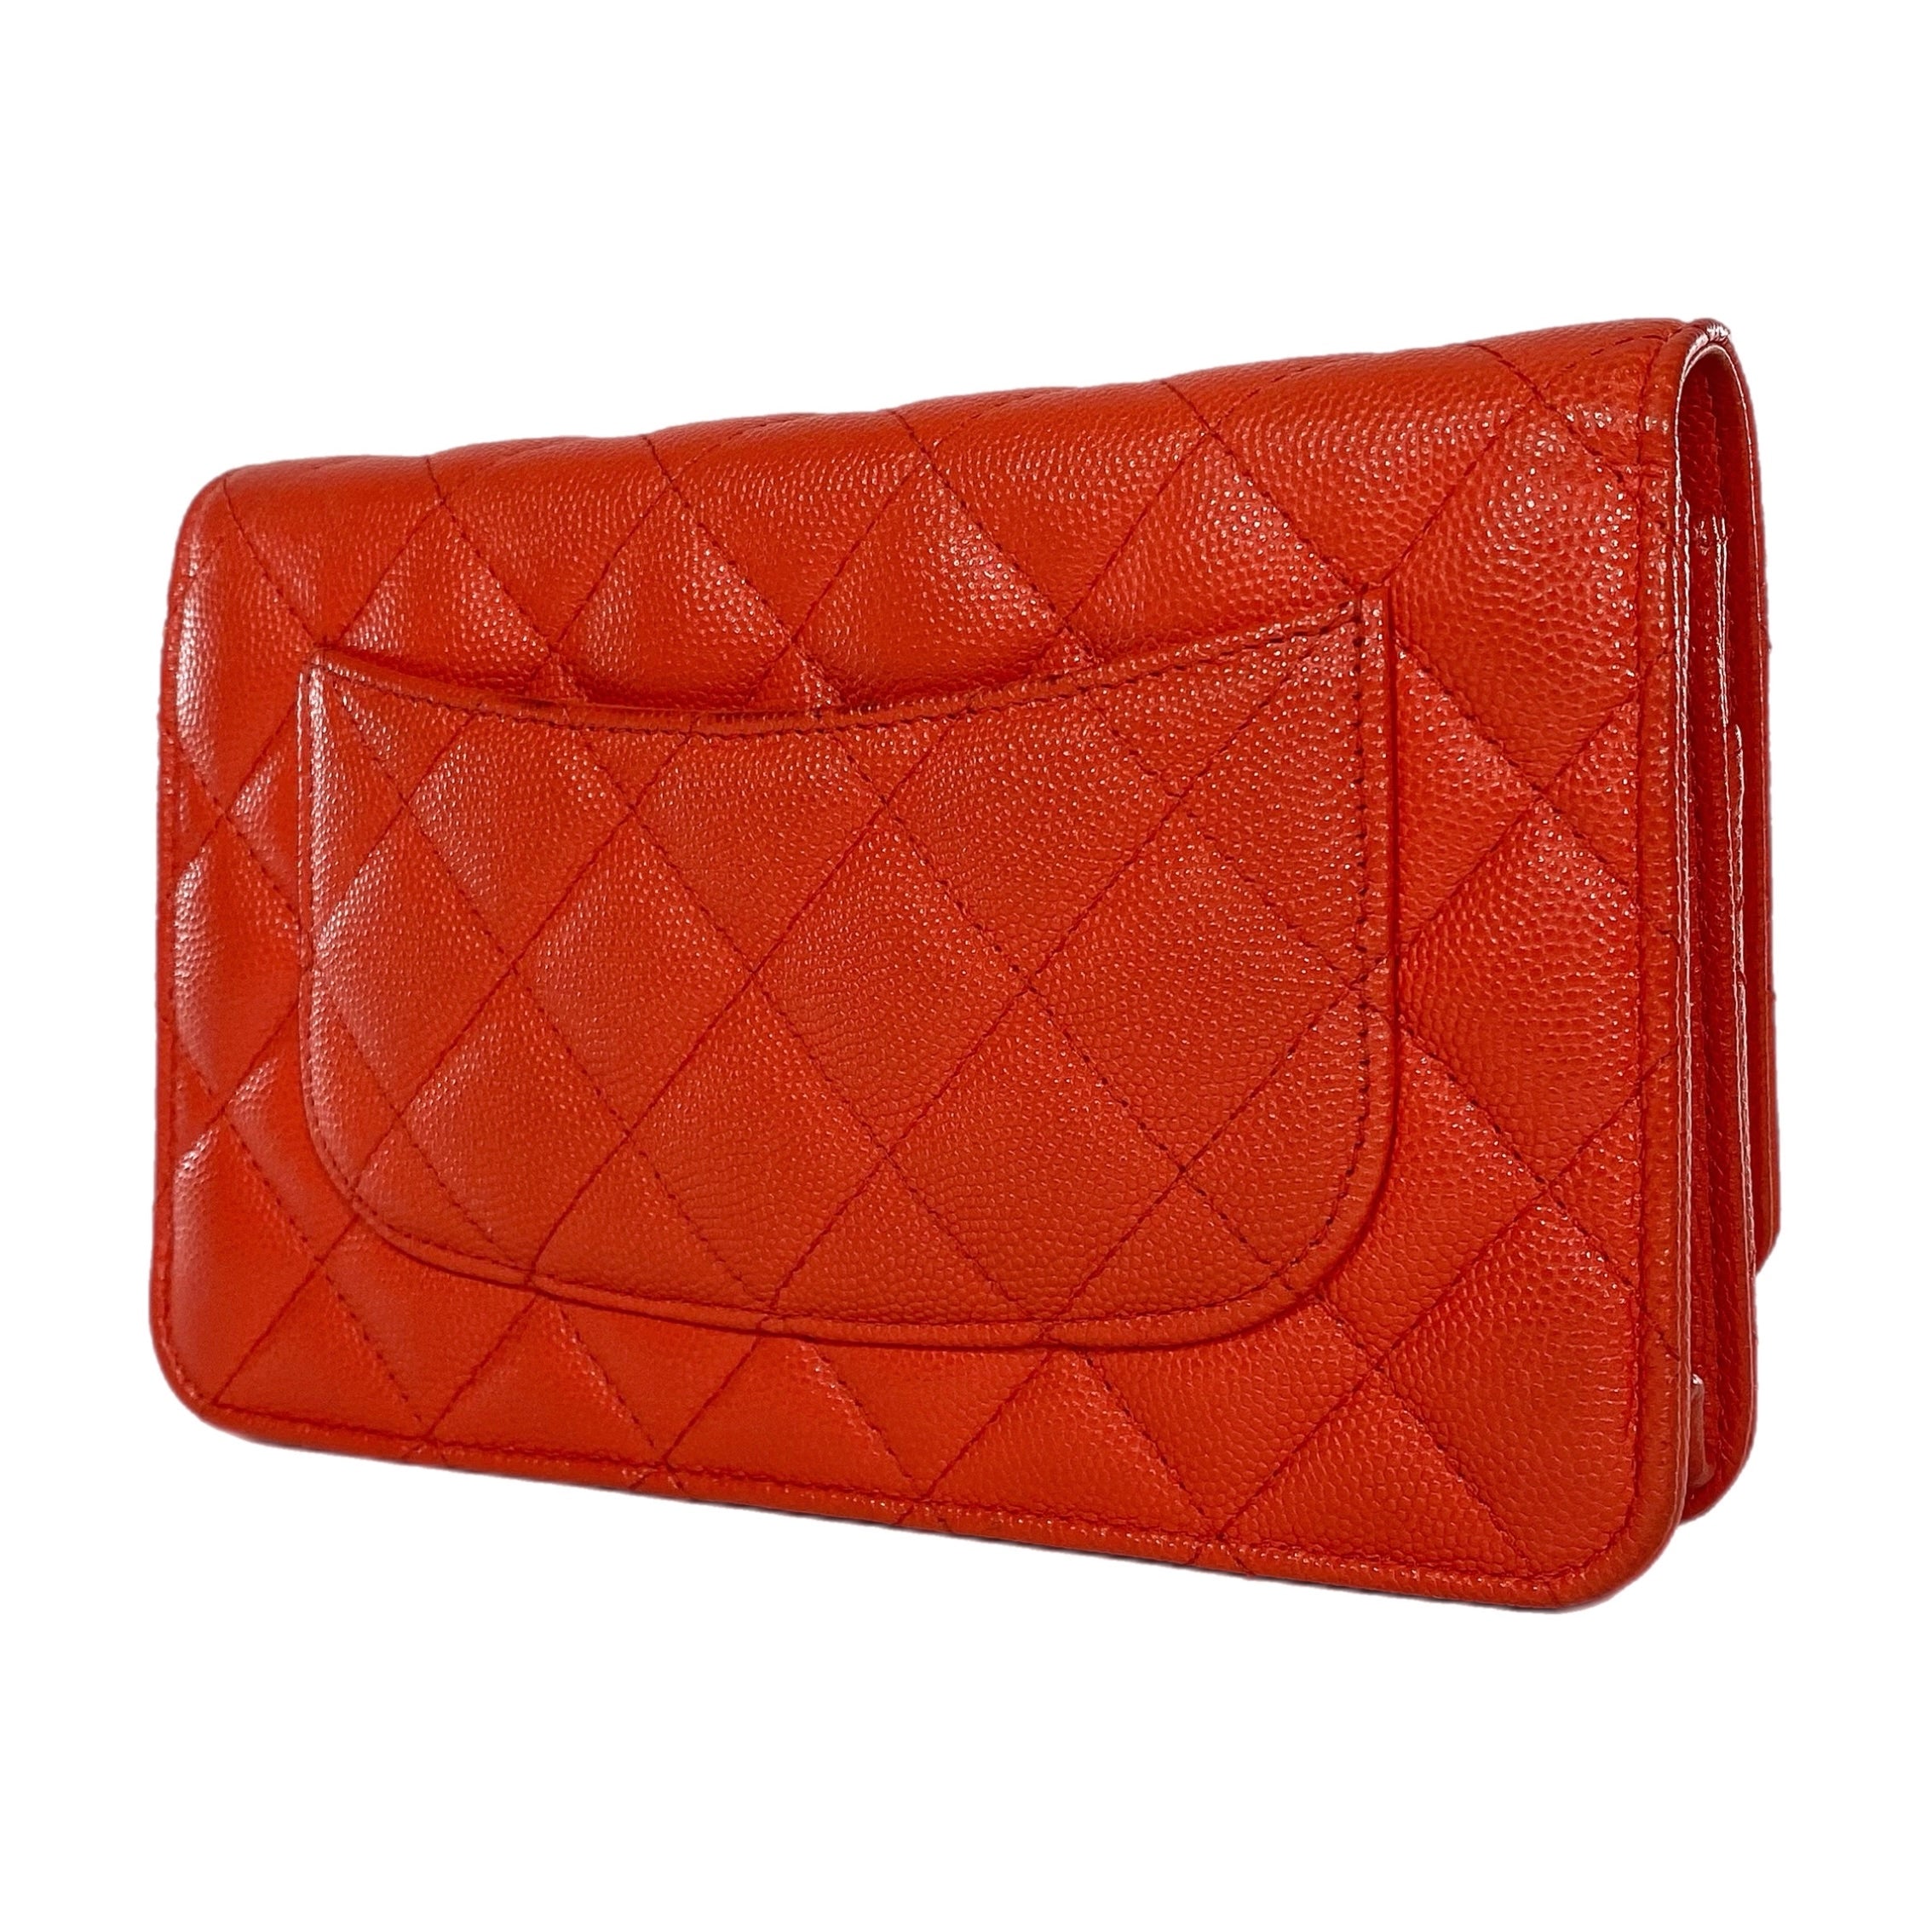 Chanel Red Coral Caviar Wallet on Chain